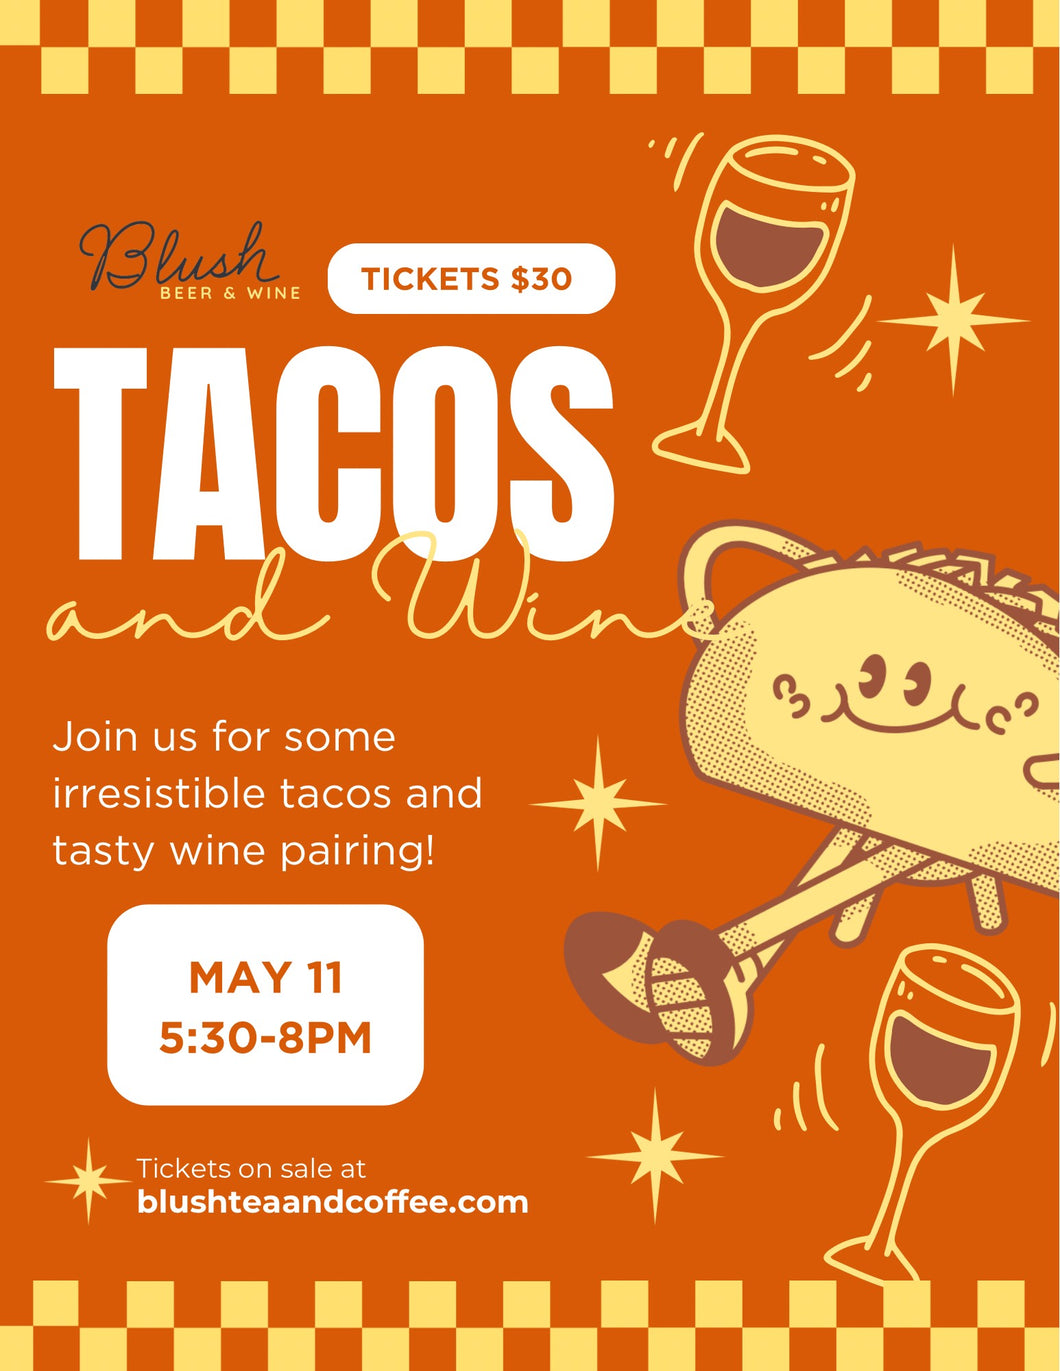 Tacos and Wine Pairing event